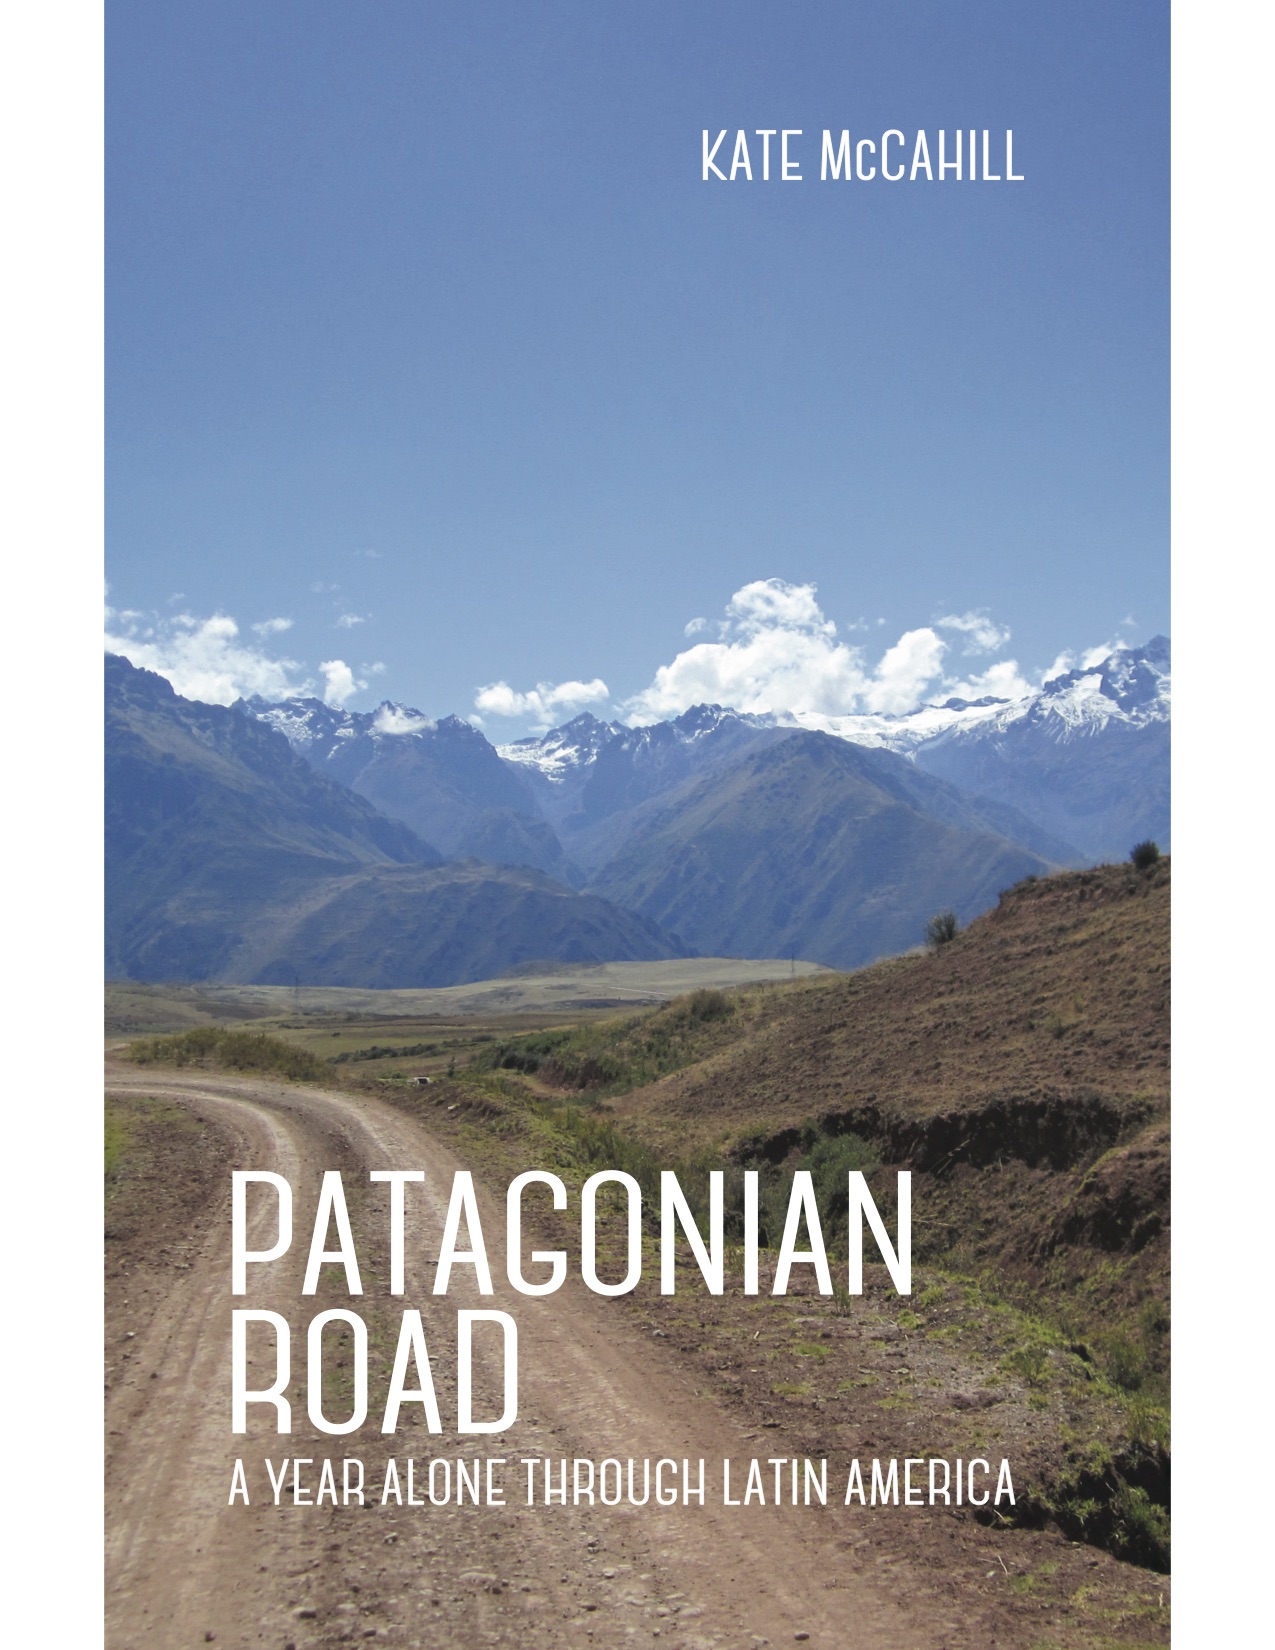 PATAGONIAN ROAD to be released in 2017!